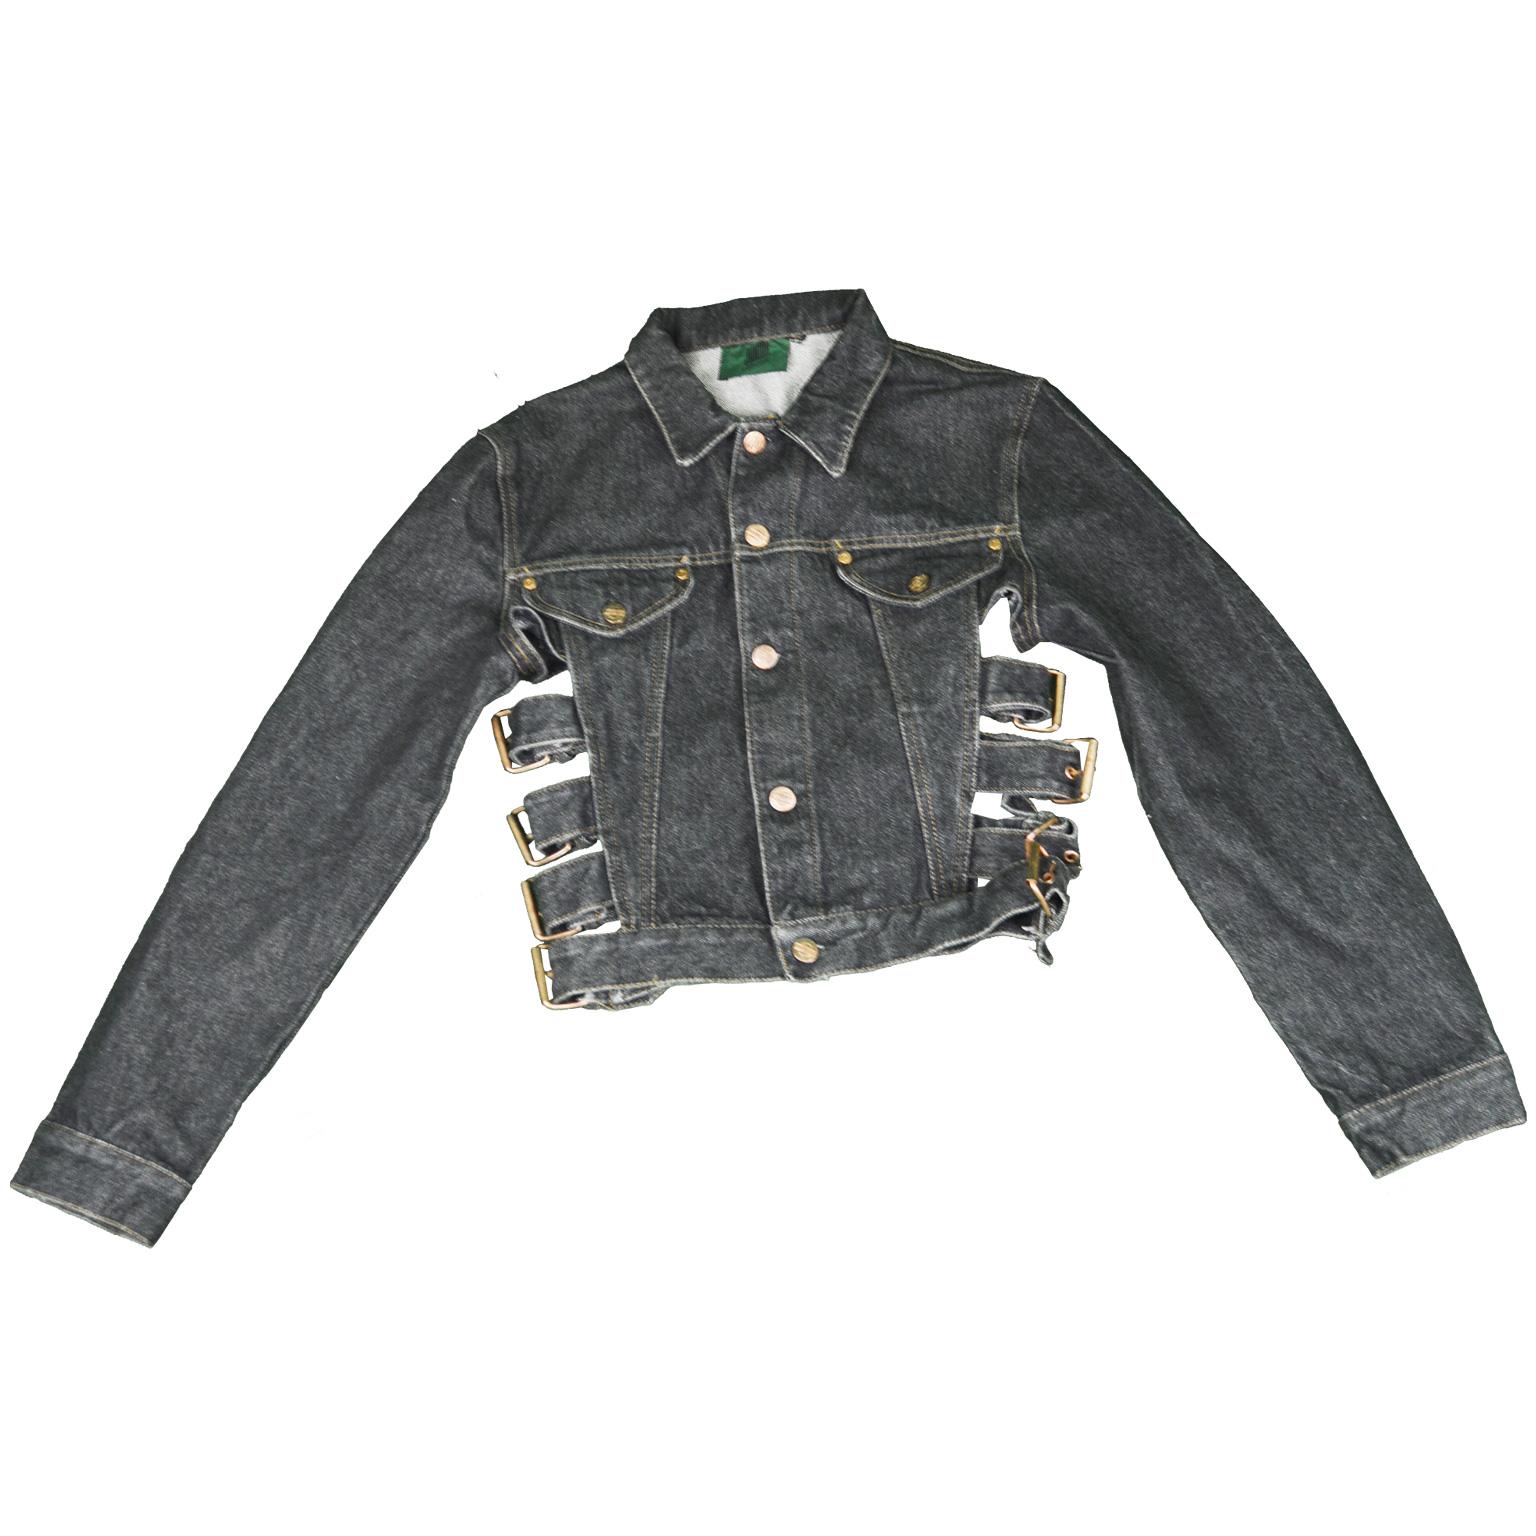 An amazing vintage women's cropped denim / jeans jacket from the late 80s / early 90s by iconic French fashion designer, Jean Paul Gaultier. In a dark grey denim with bondage inspired buckle straps at the side which nips in the waist and gives a